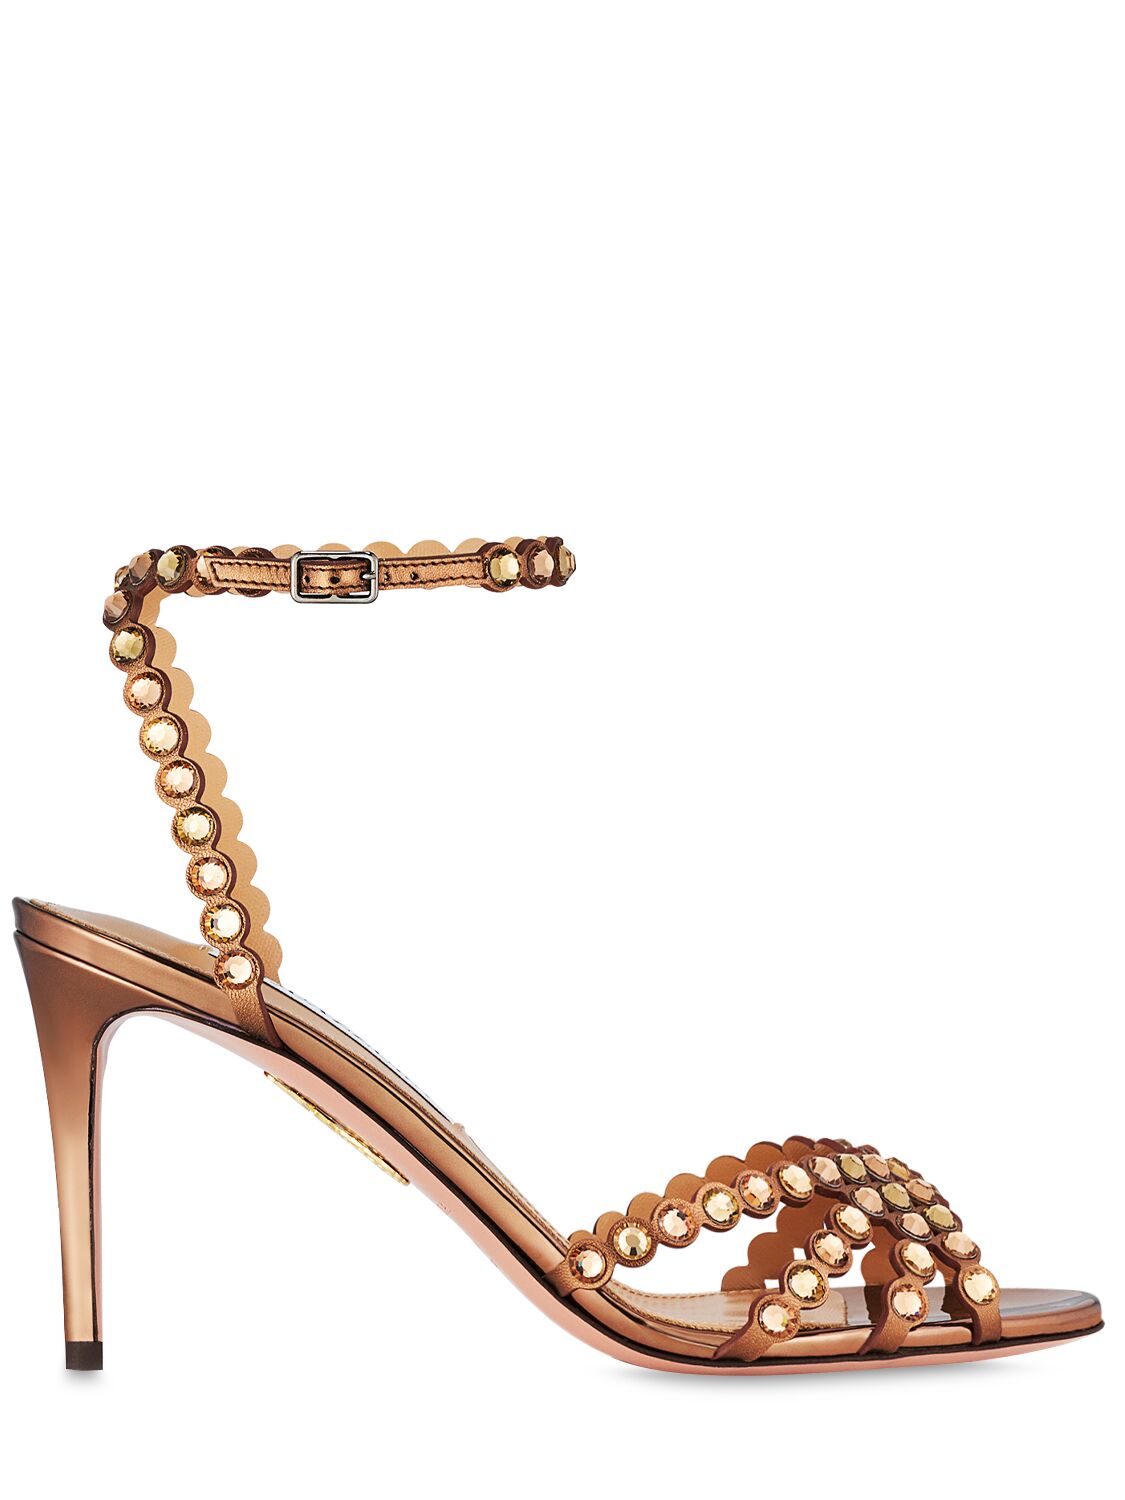 Aquazzura 85mm Tequila Laminated Leather Sandals In Light Brown